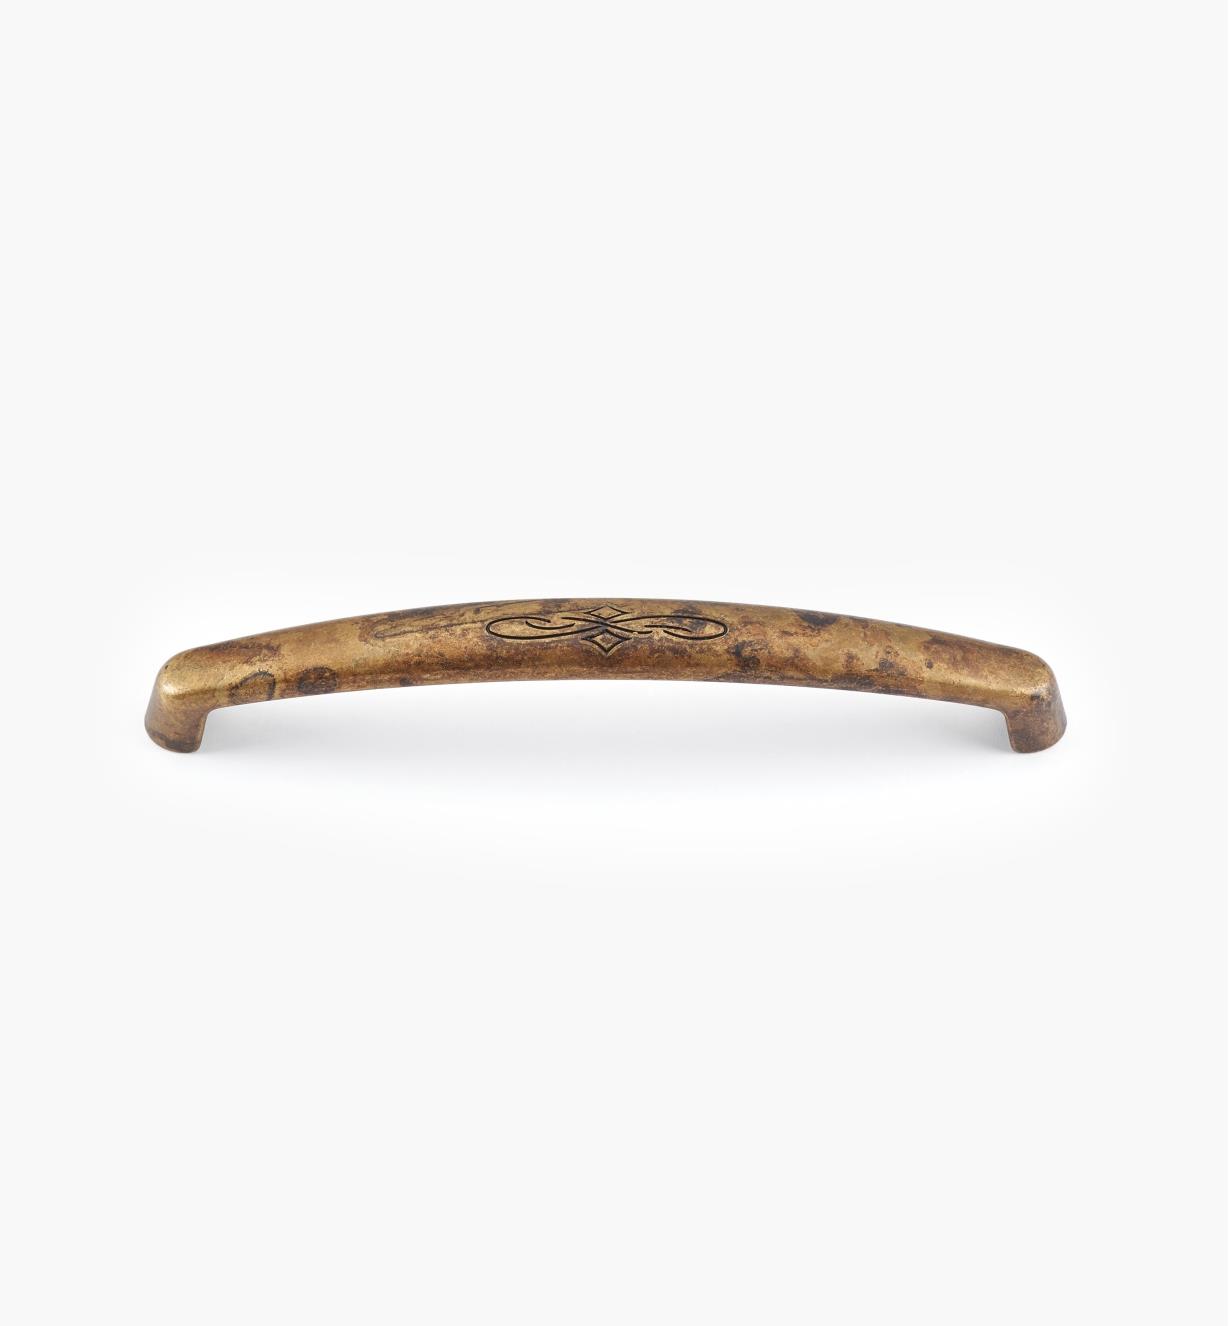 01X4103 - 128mm Detailed Old Brass Handle